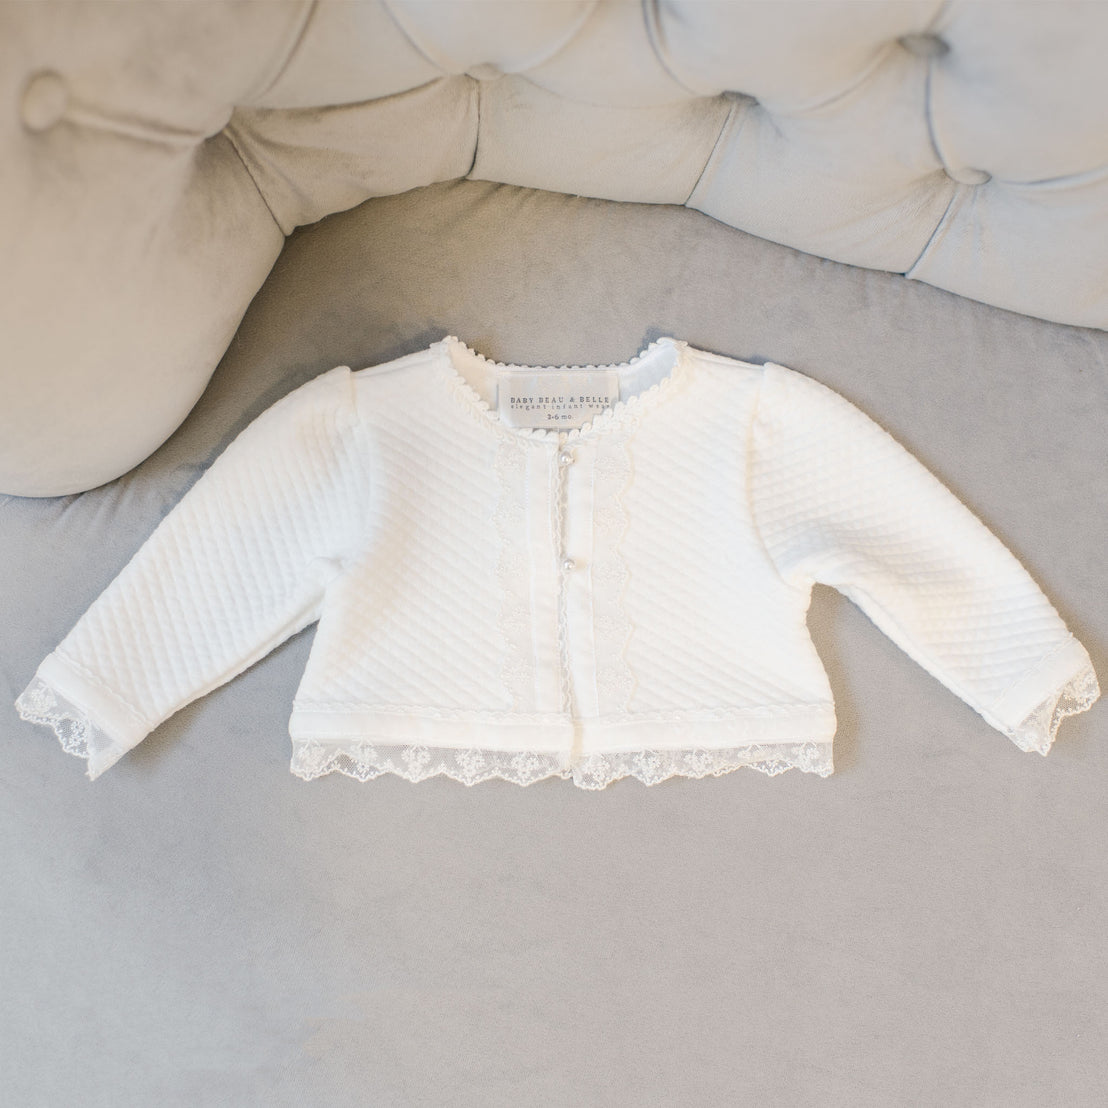 A small white Grace Quilted Cotton Sweater with floral lace trim is laid out on a soft gray surface.